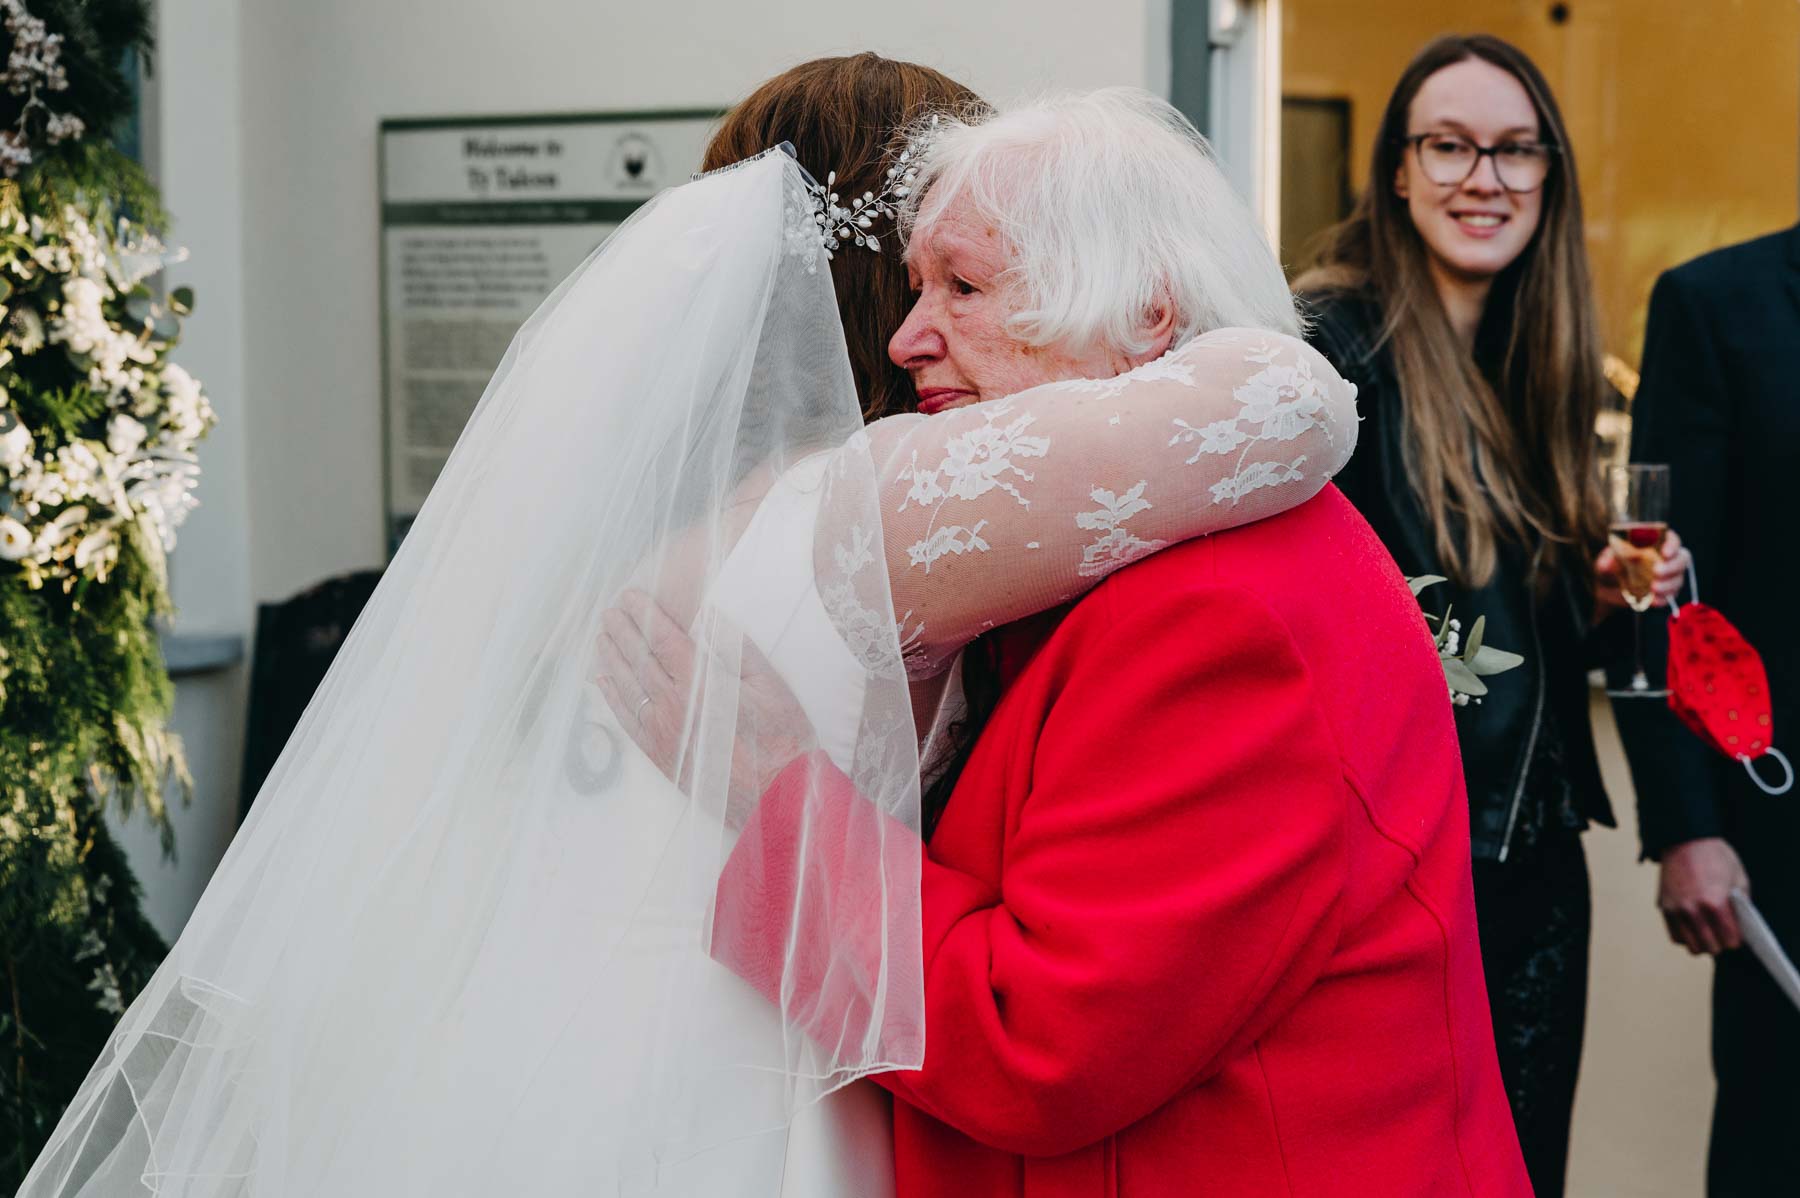 The bride with her grandma - natural wedding photography - Wales